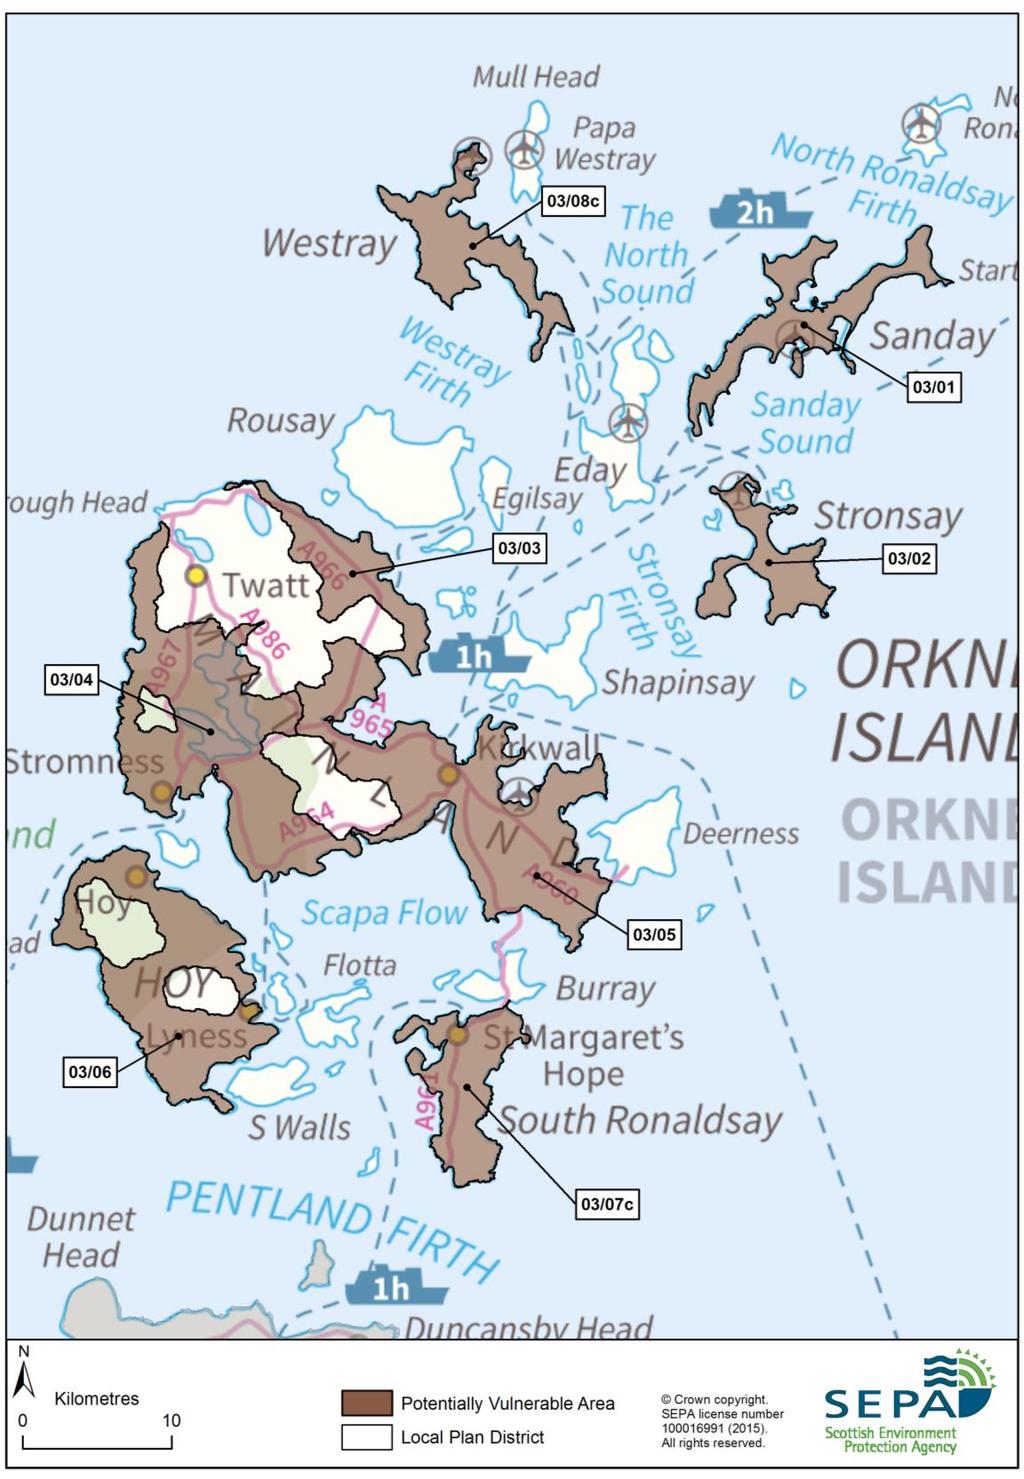 Figure 2: The Orkney Island Local Plan District with Potentially